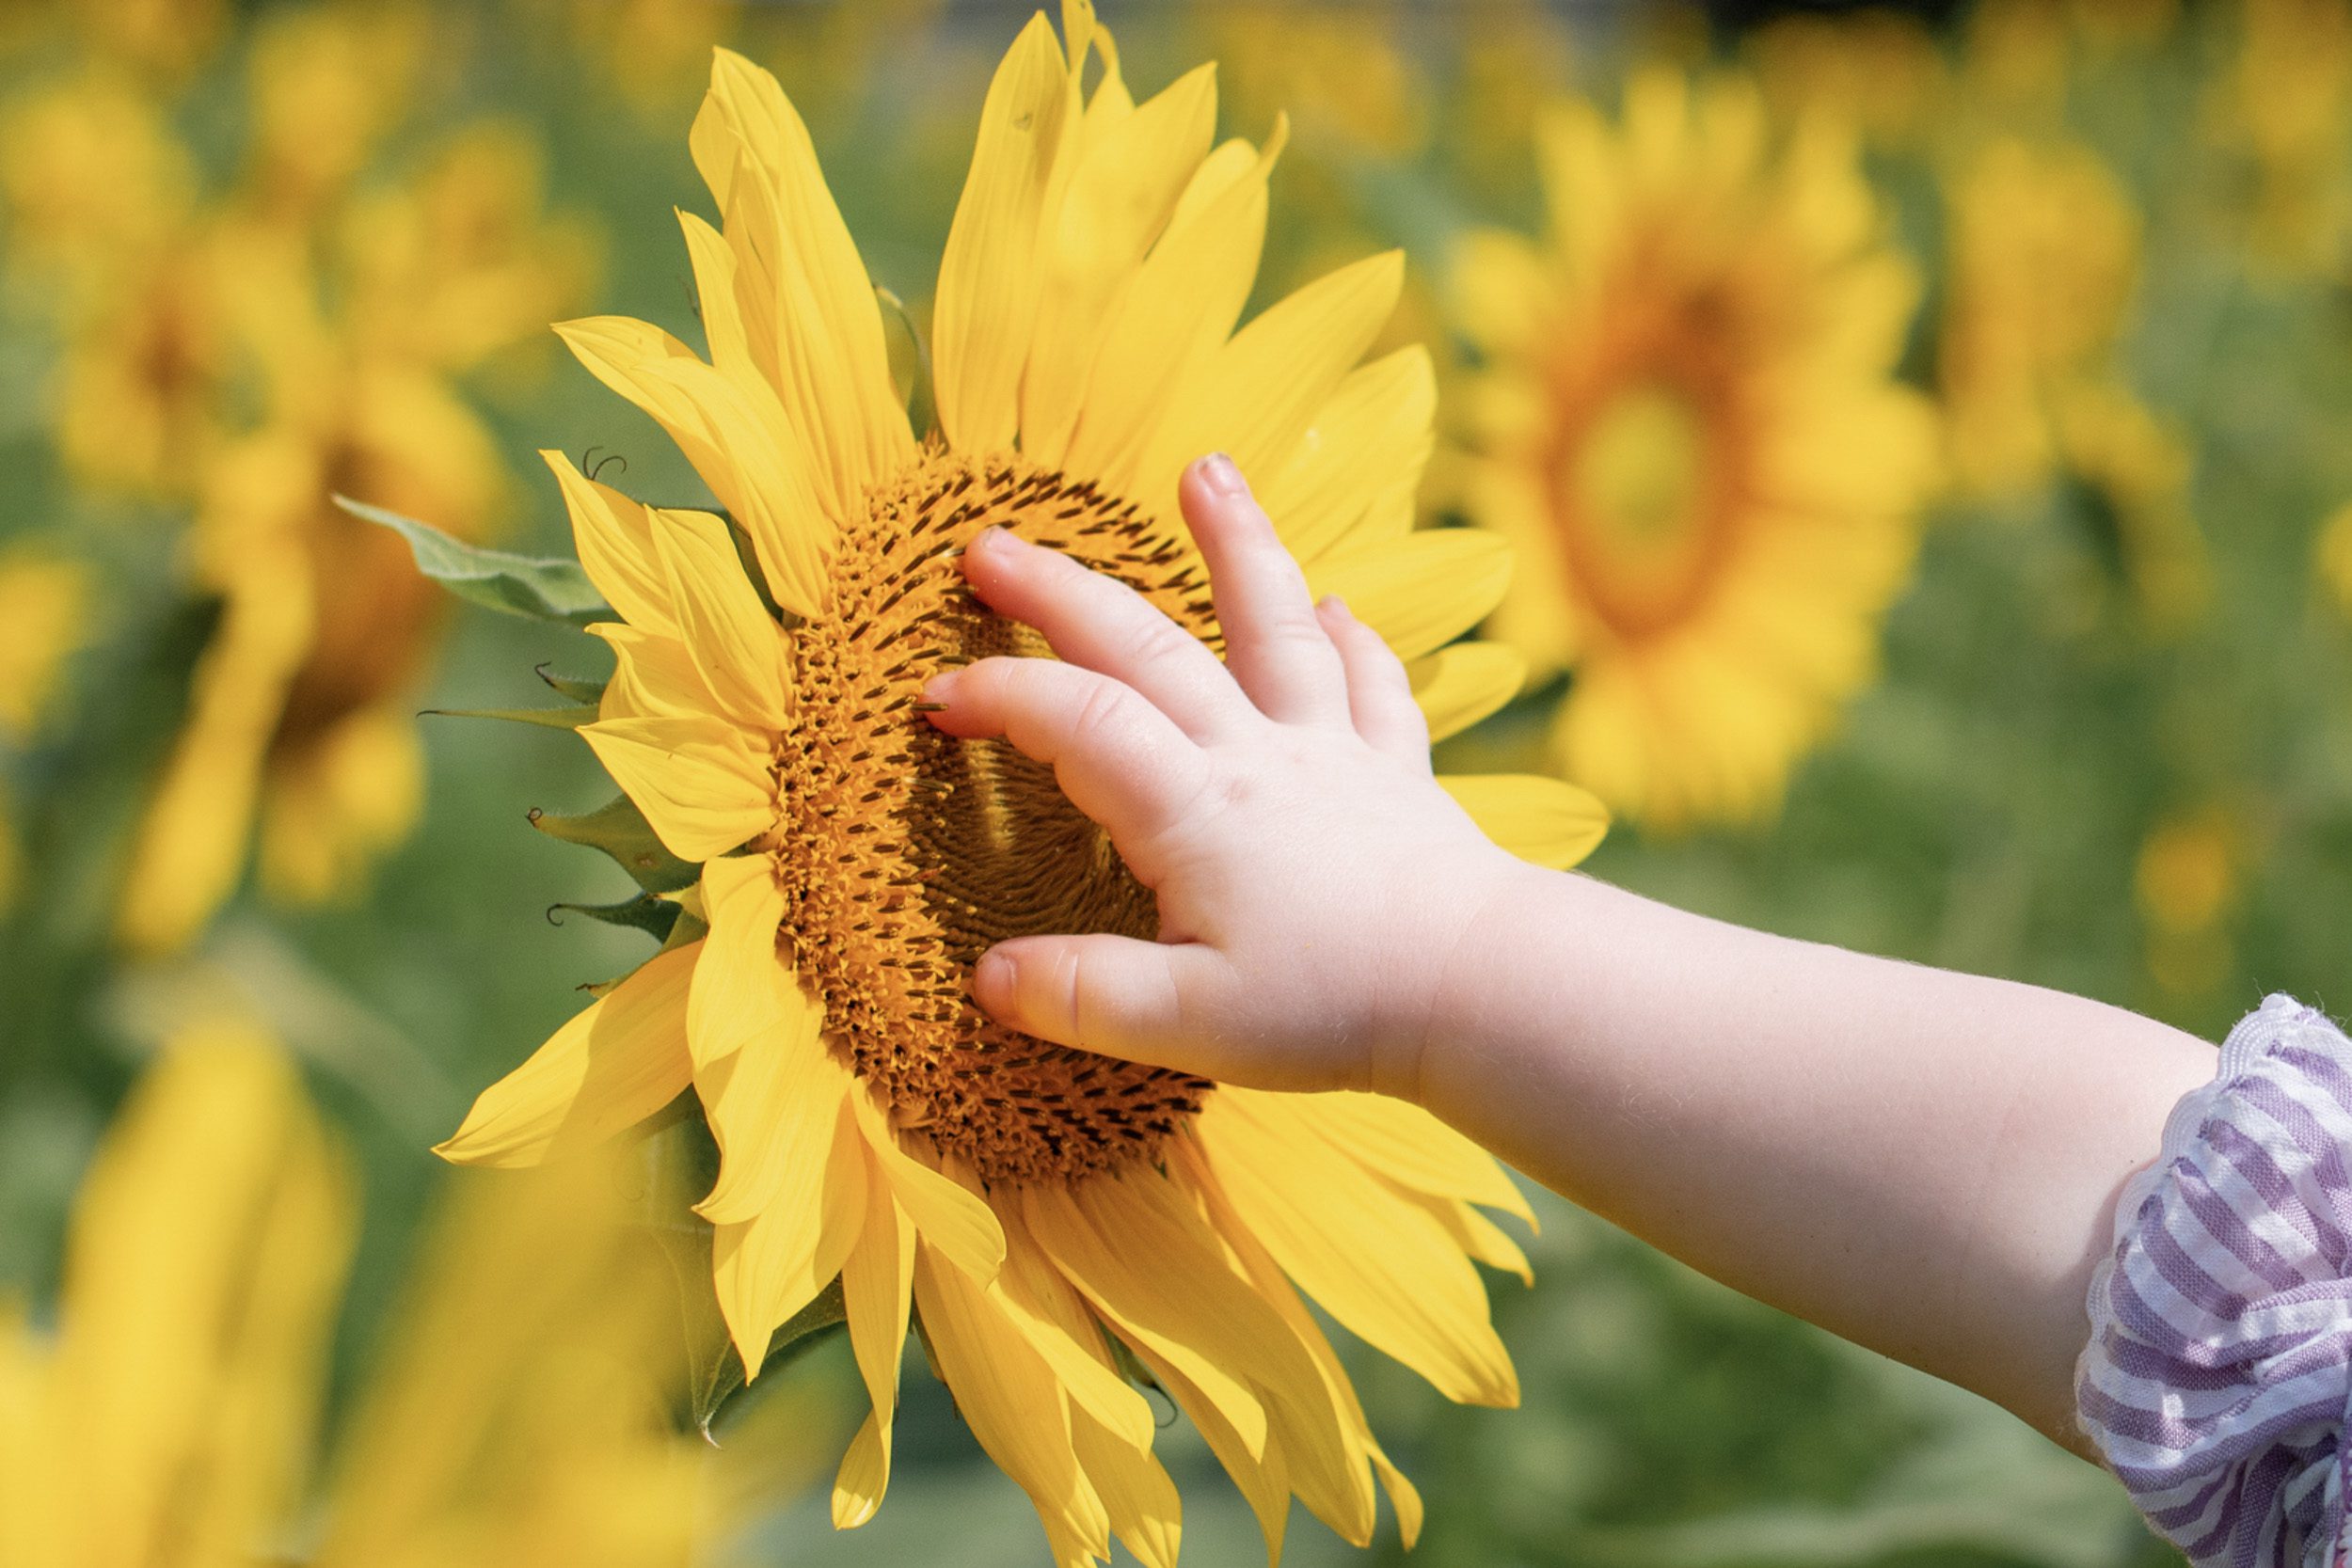 A close up picture of a little girl reaching out to touch a sunflower with her hand during a family photoshoot